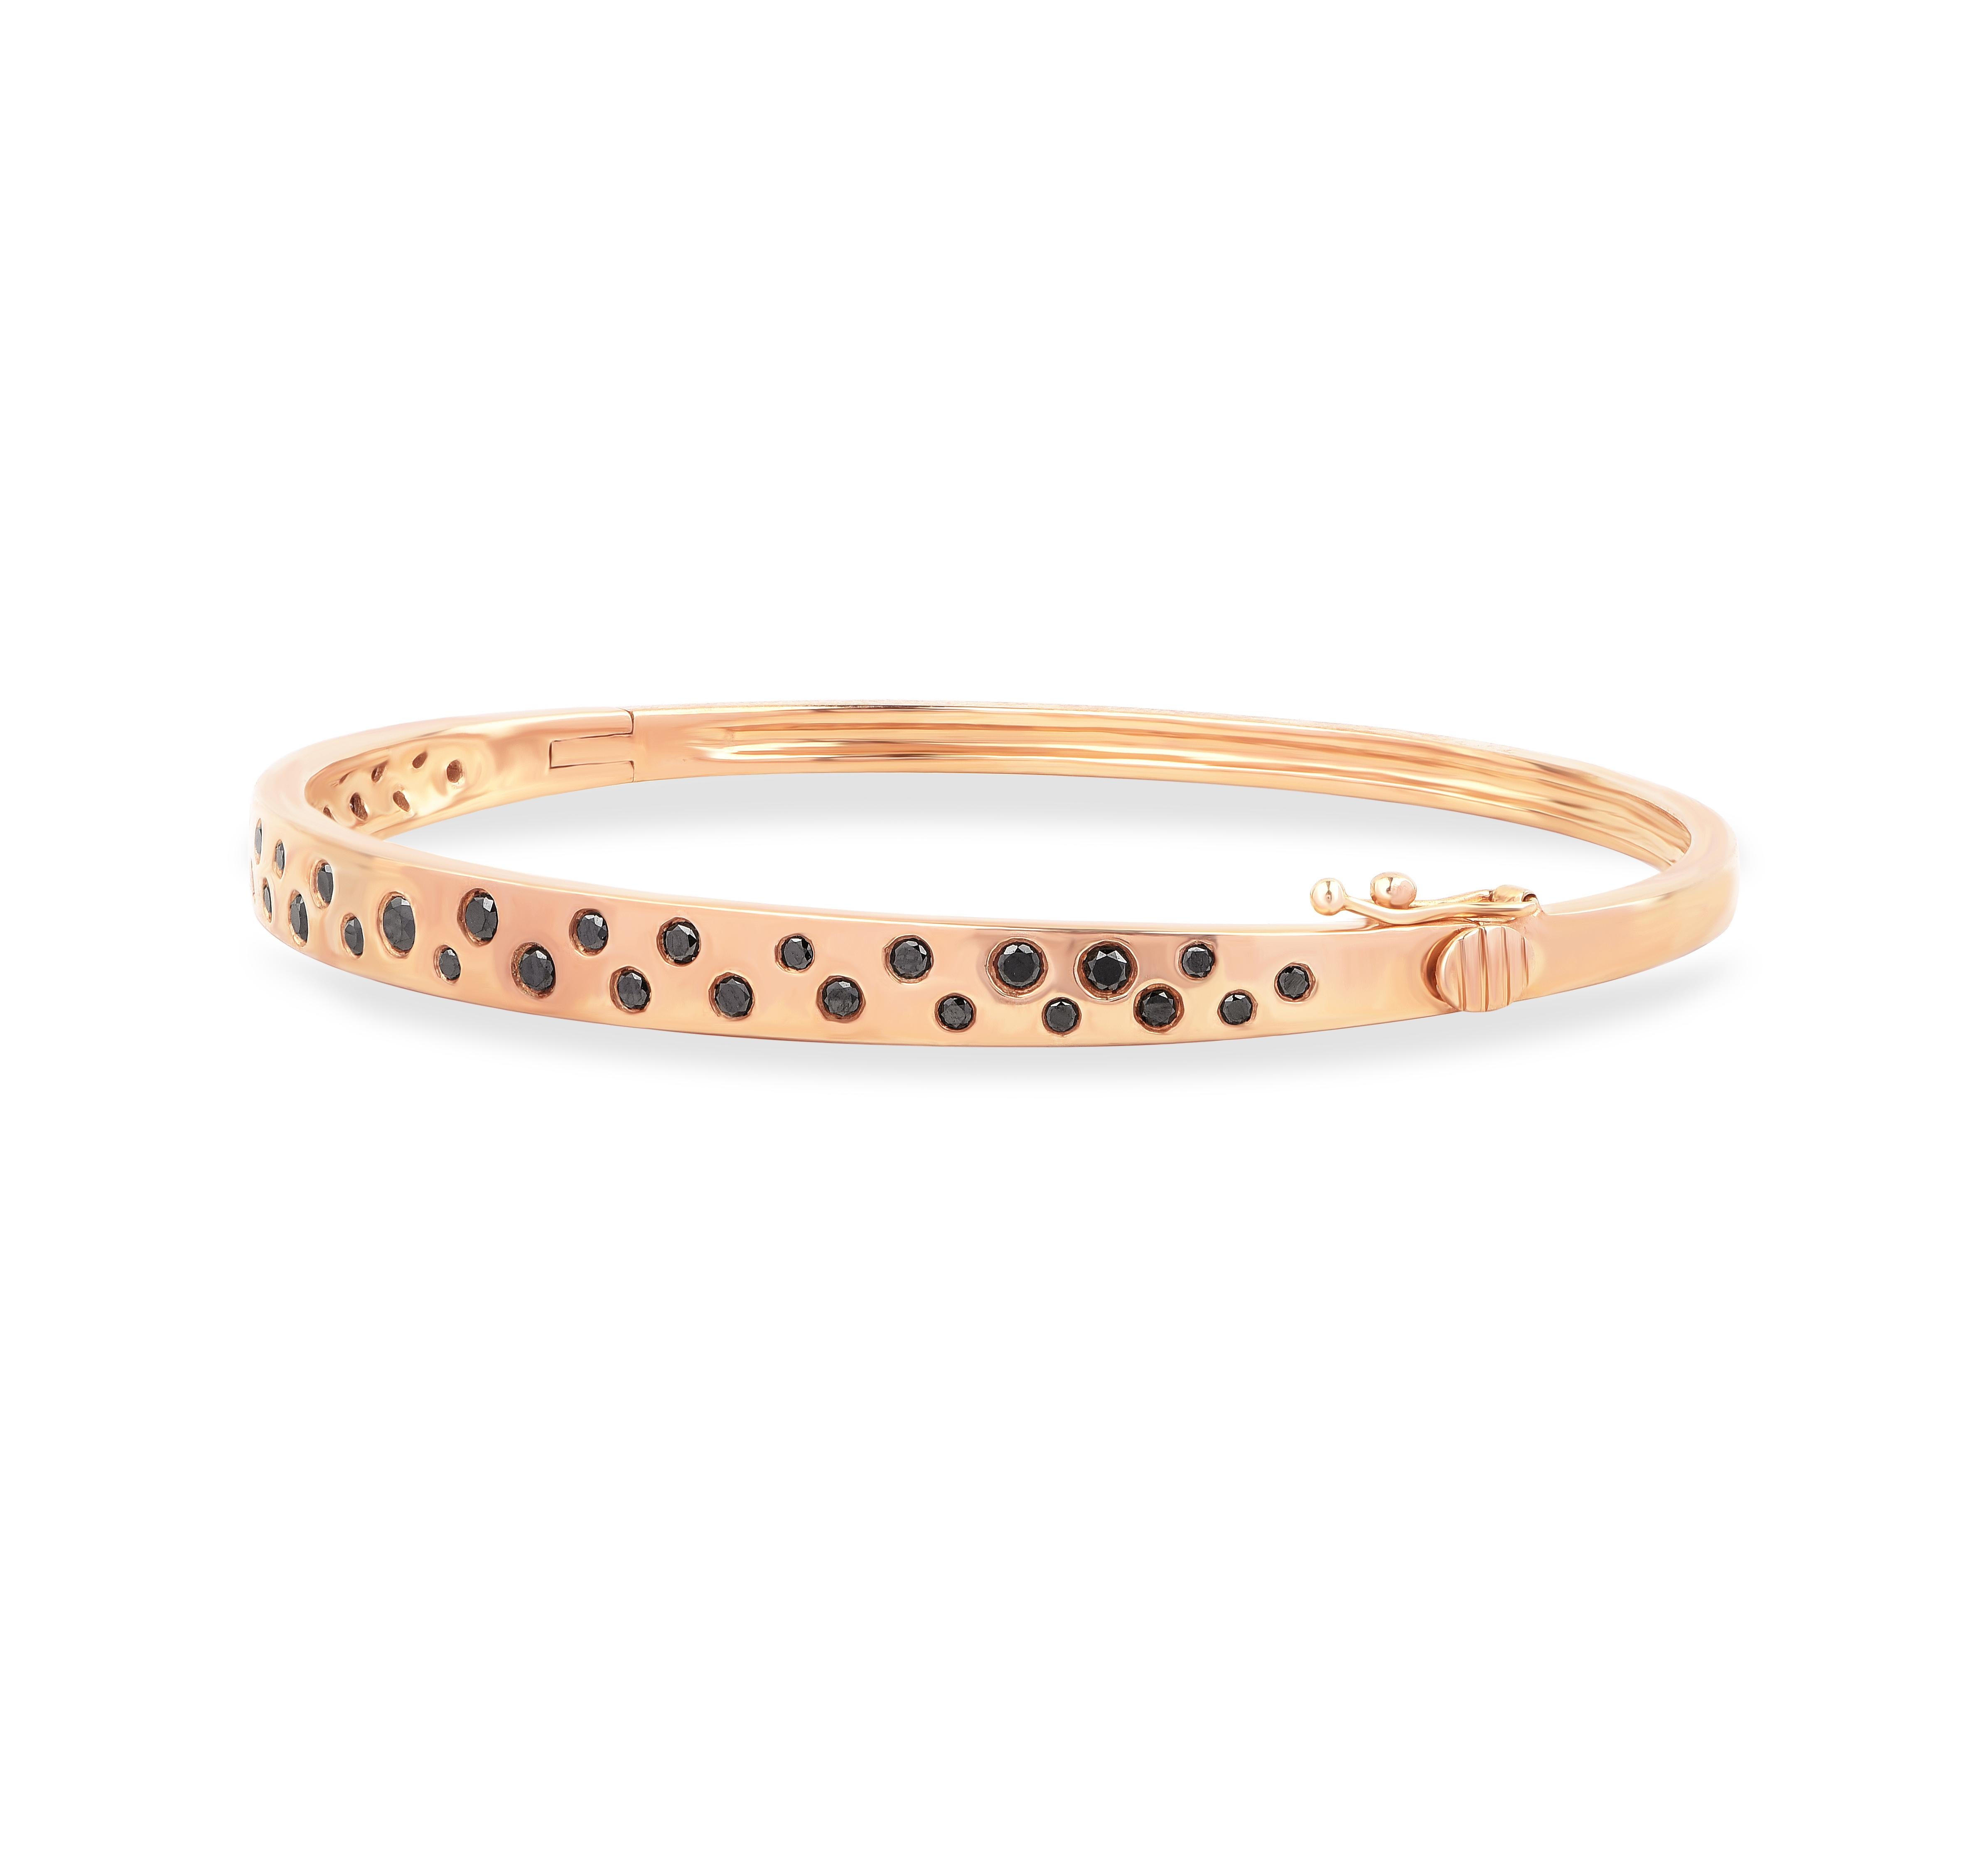 Studded with 38 brilliant cut treated black diamonds in flush setting and made by our skillful craftsmen in 18-karat yellow gold.  This designer bangle that will make a great gift for yourself or friends and family.  

This piece is made to order,